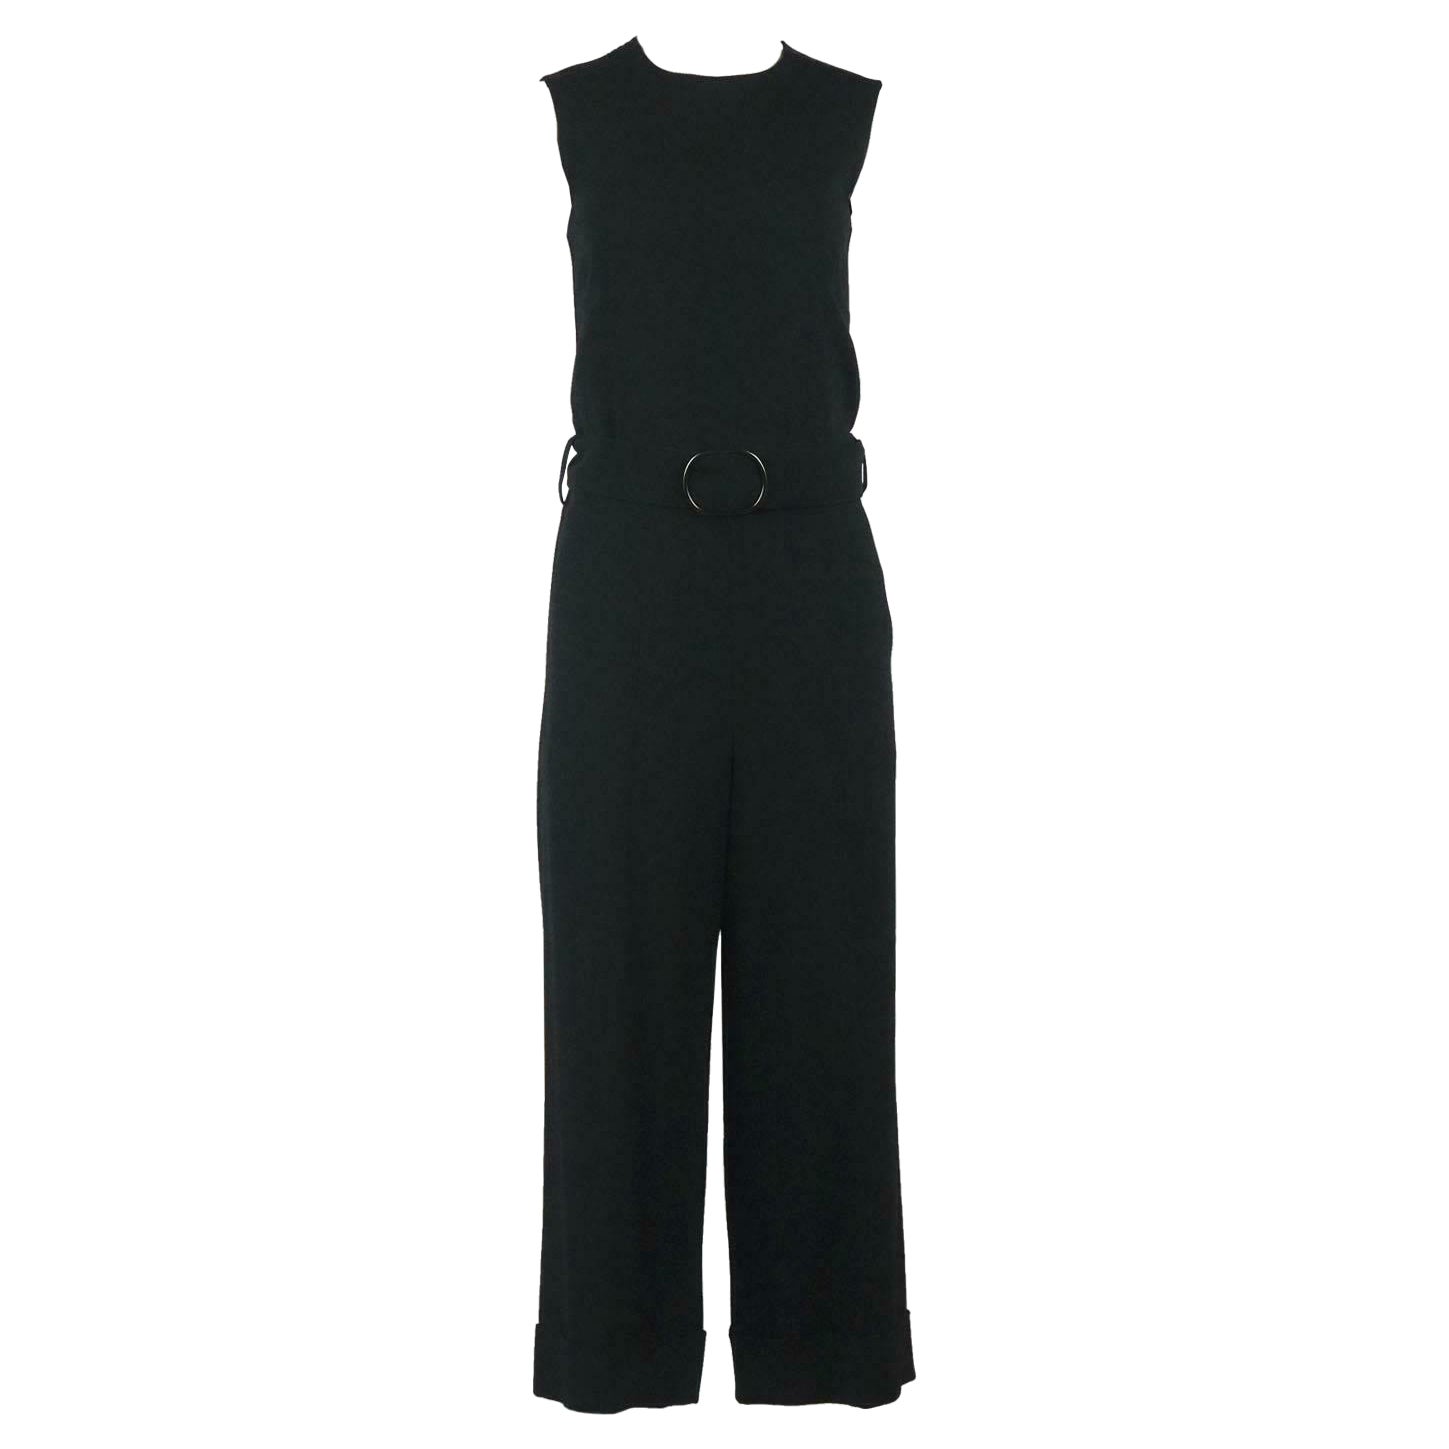 Sportmax Cropped Belted Crepe Jumpsuit